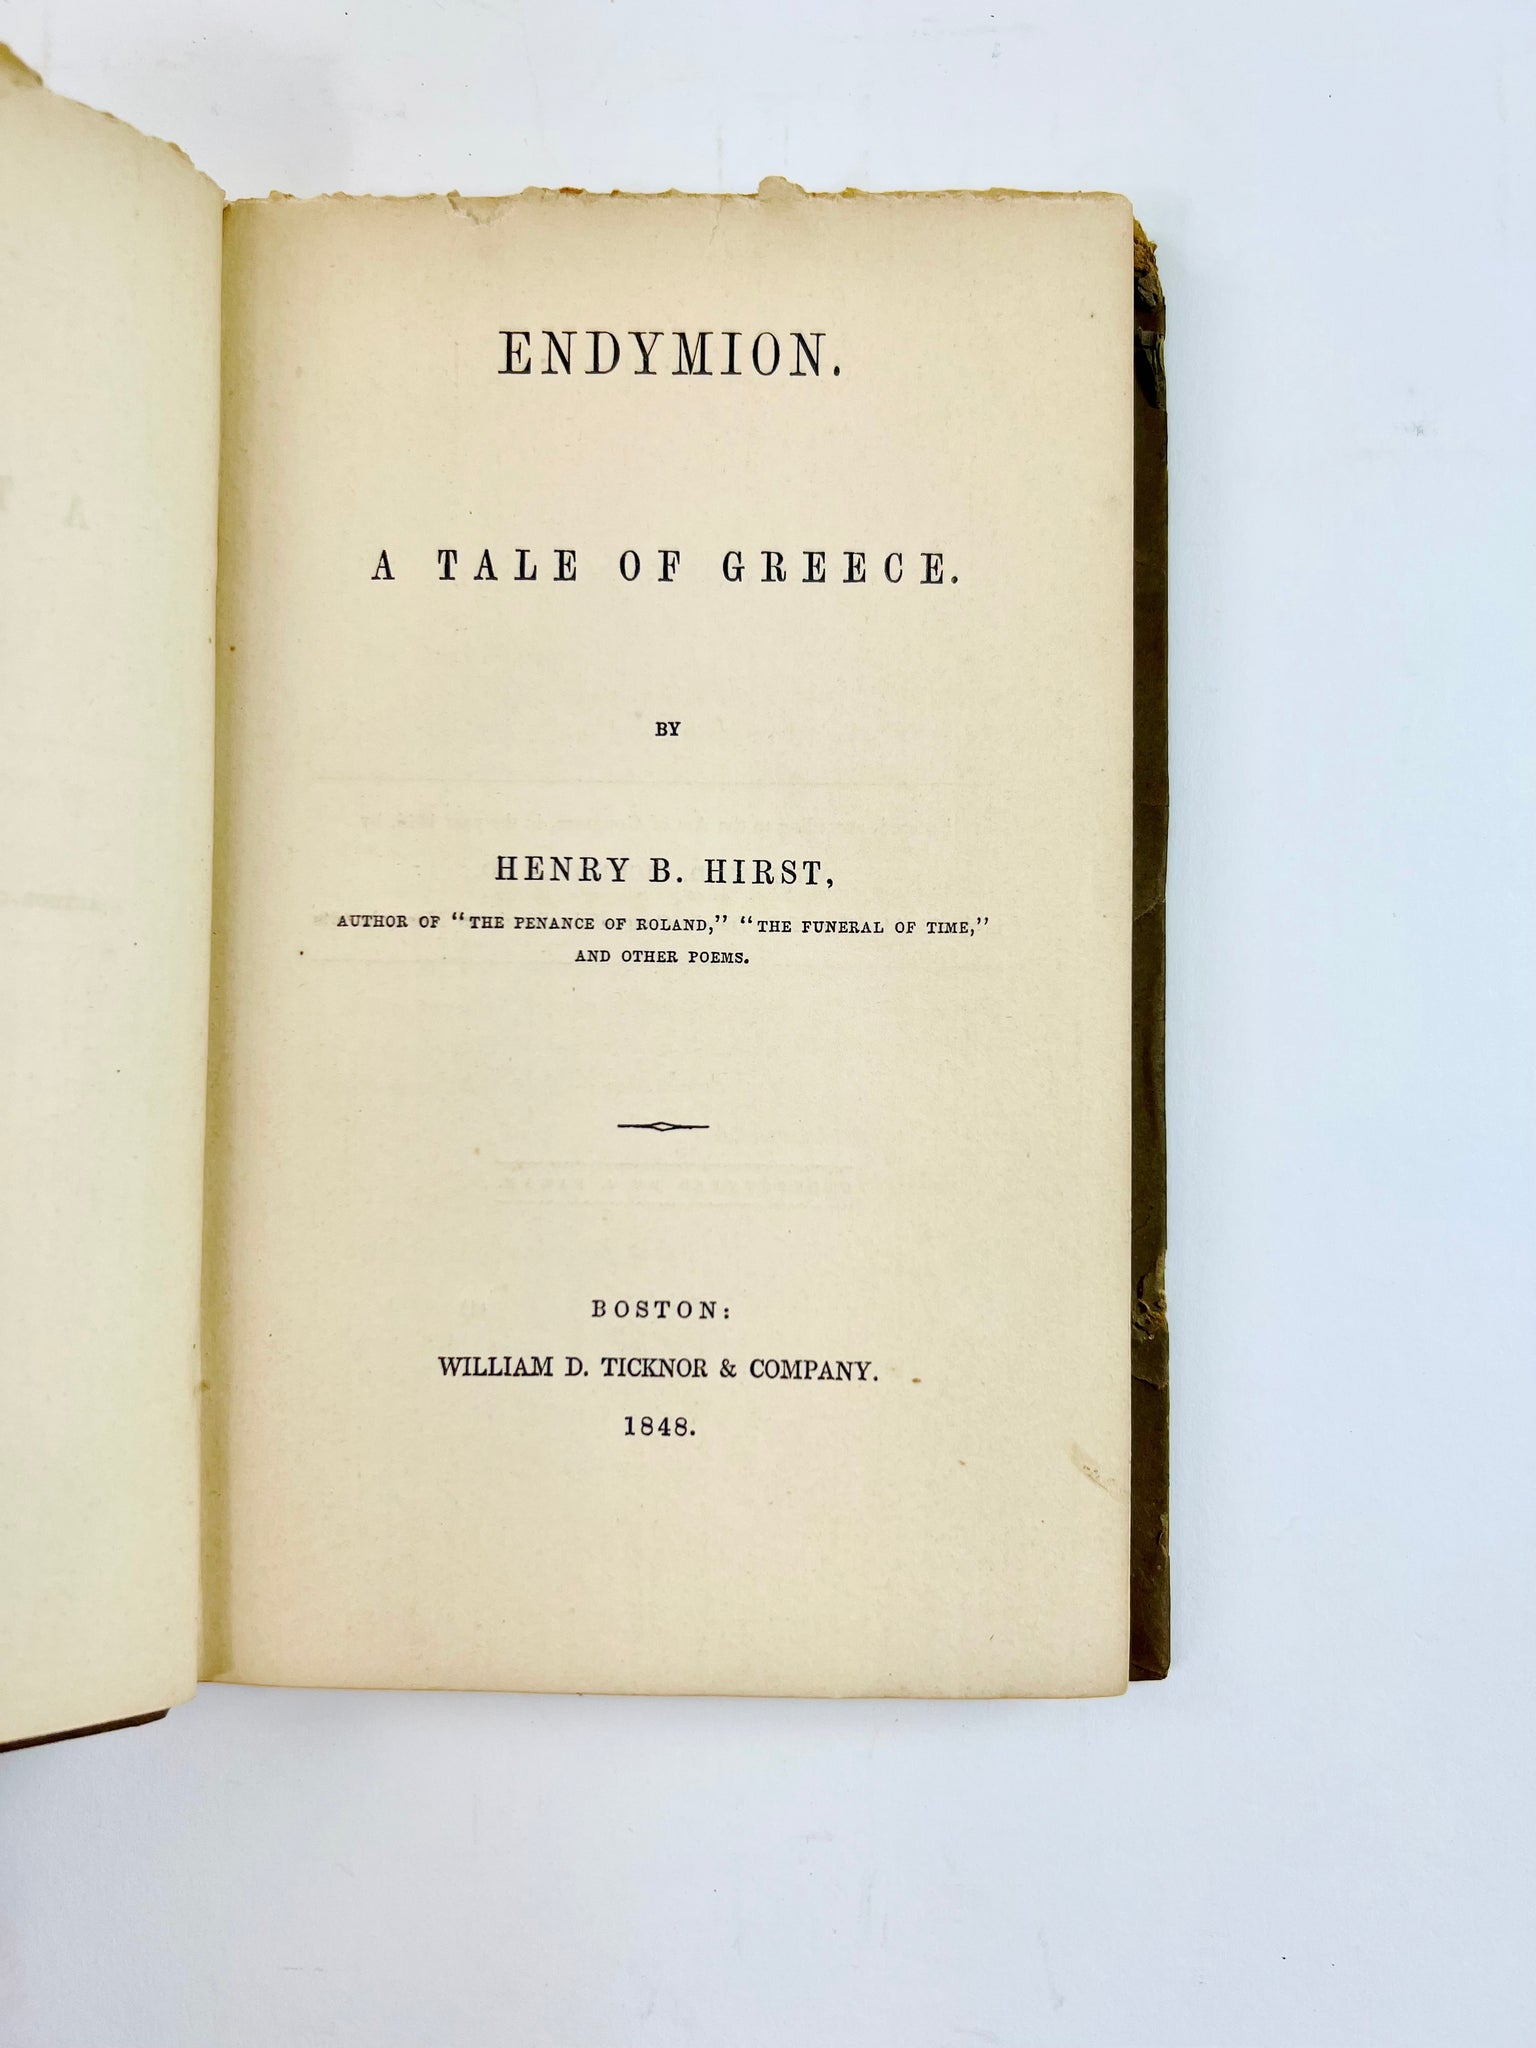 HIRST, Henry Beck. Endymion. A Tale of Greece.